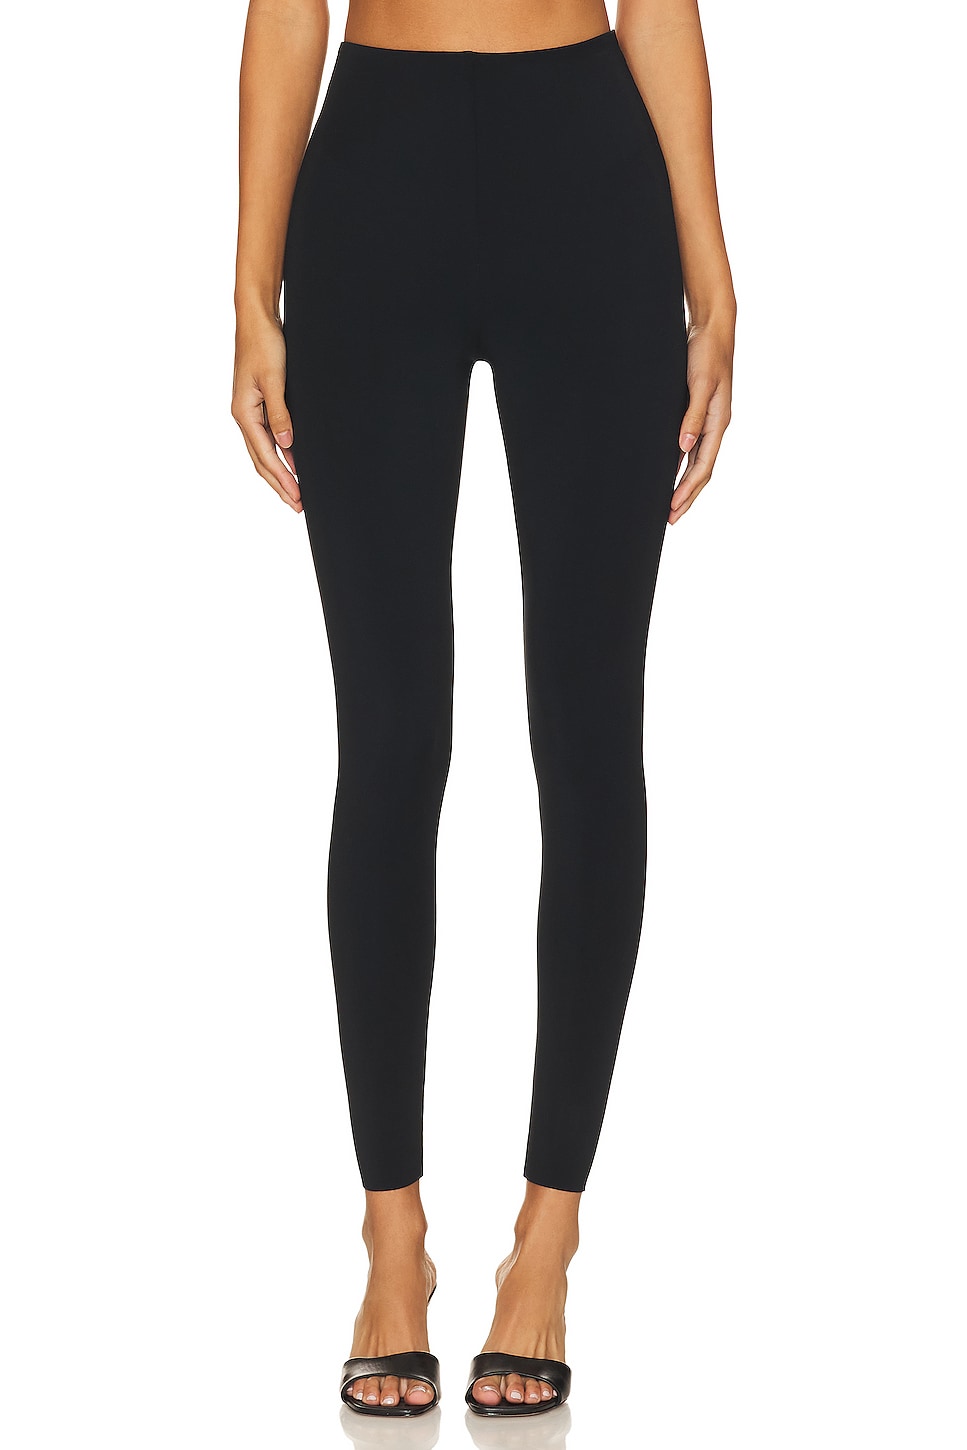 Theory Seamed Legging in Black